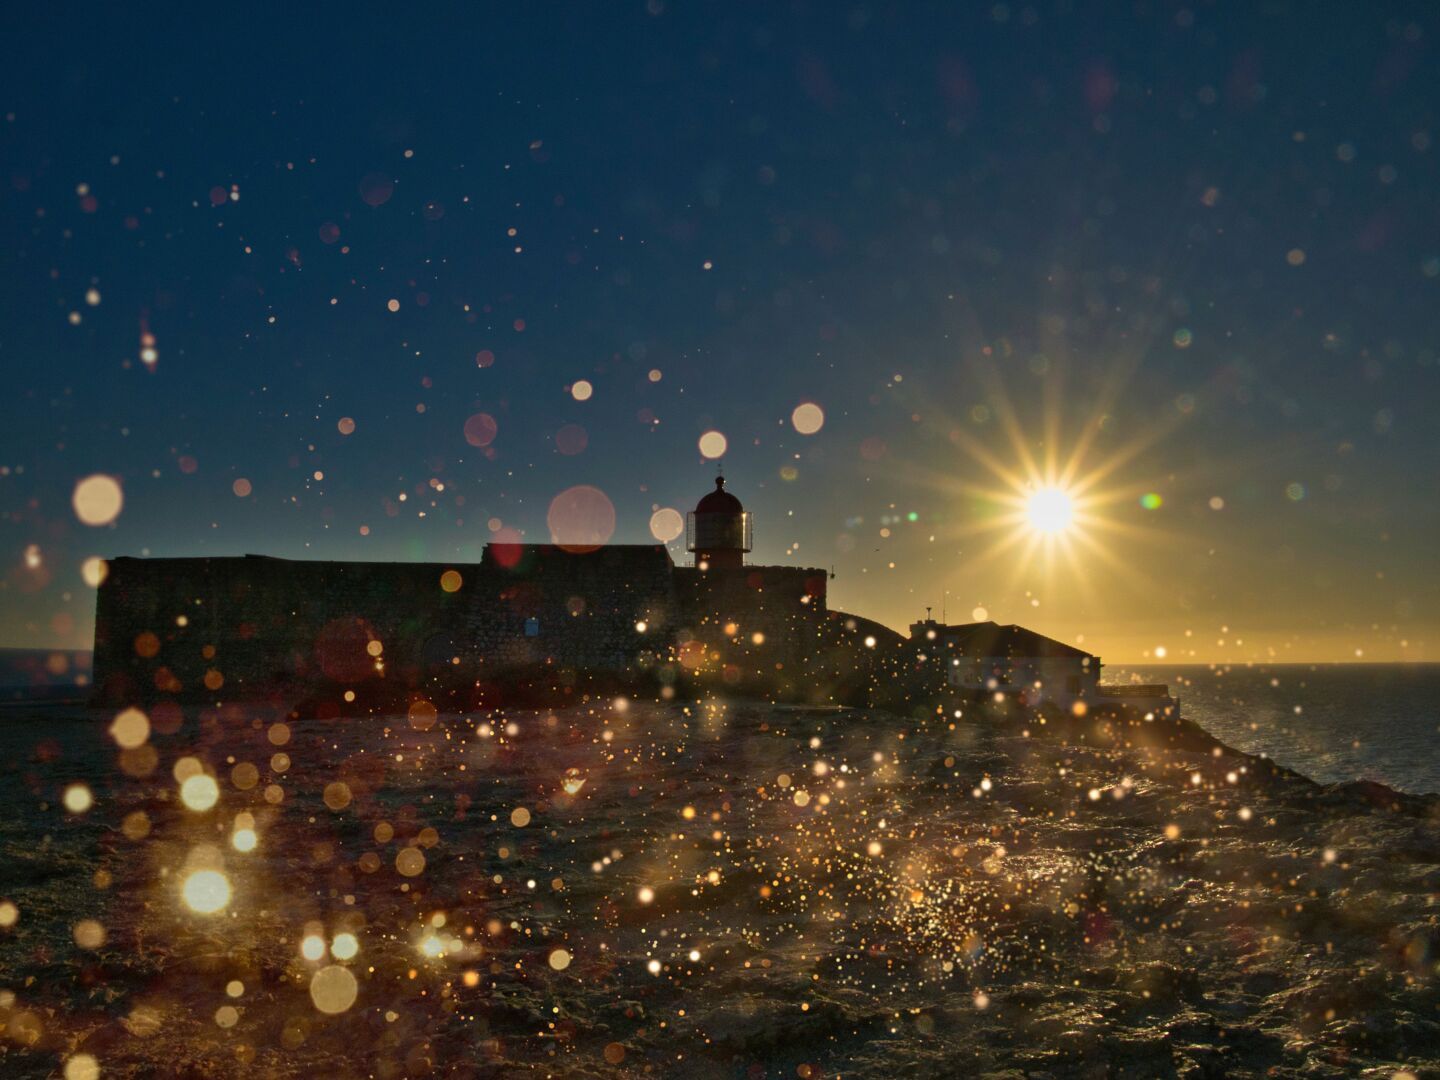 When the sea splashed the lens…

#seascape #pontadesagres #portugal #photography #sunset #lighthouse #meermittwoch